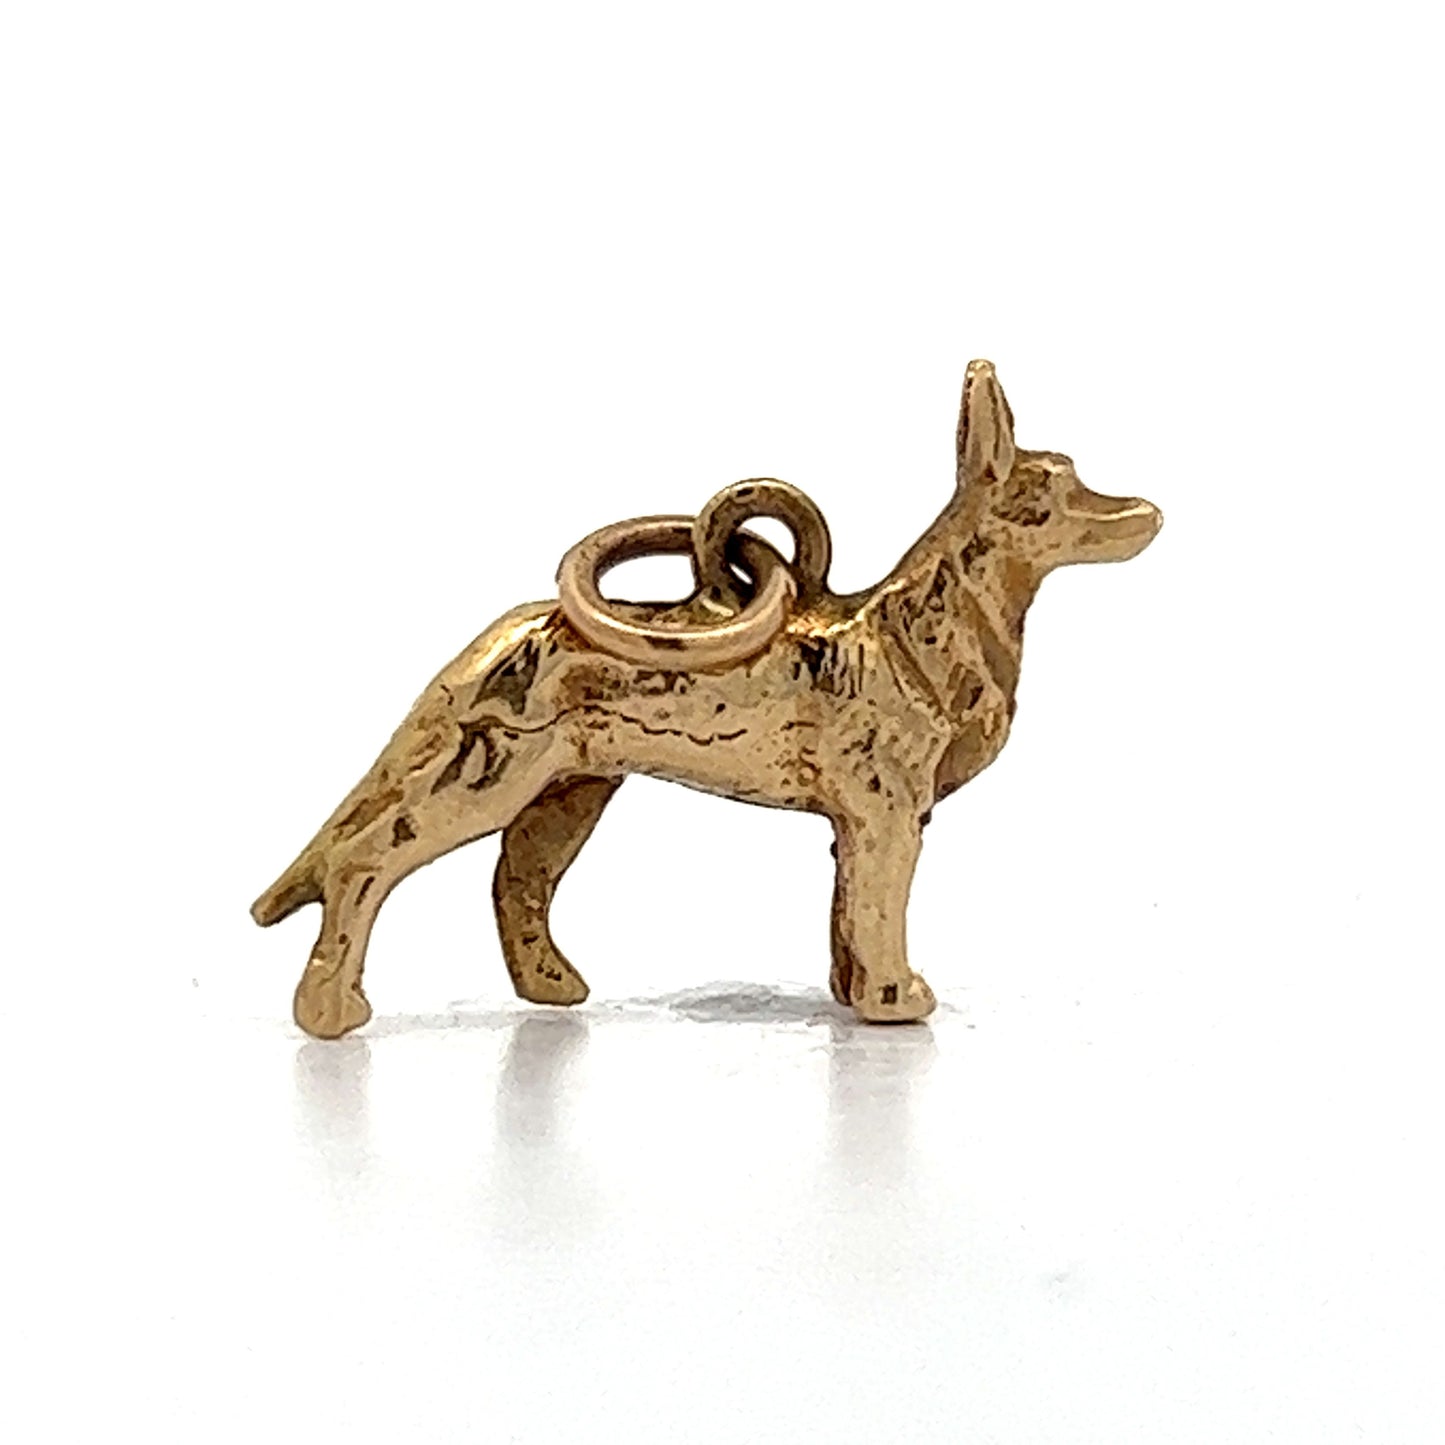 Vintage Mid-Century Dog Charm in 14k Yellow Gold